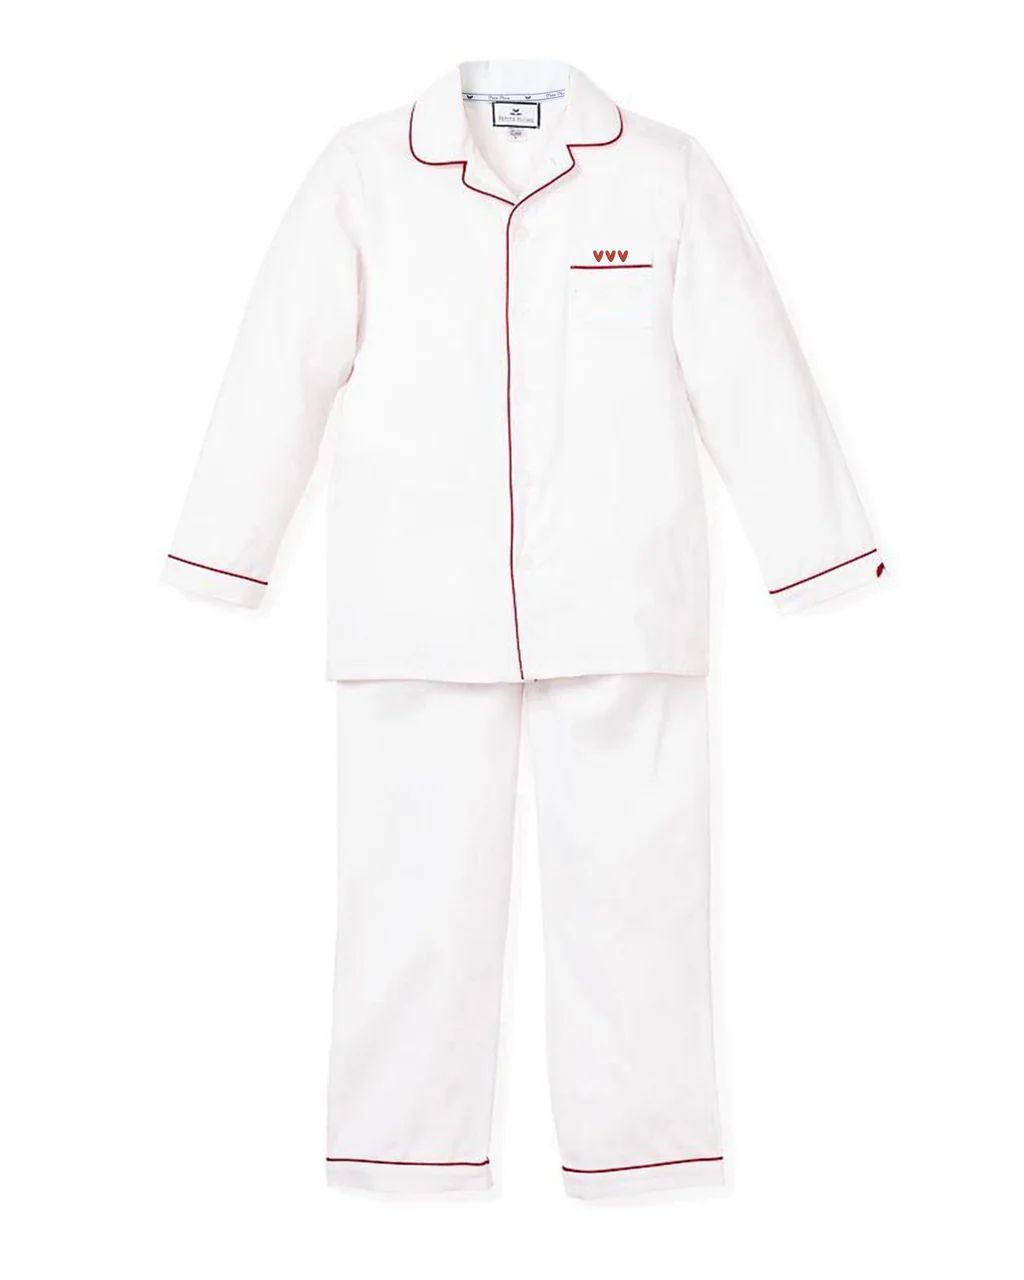 Valentine's Limited Edition - White Pajama Sets with Heart Embroidery | Petite Plume